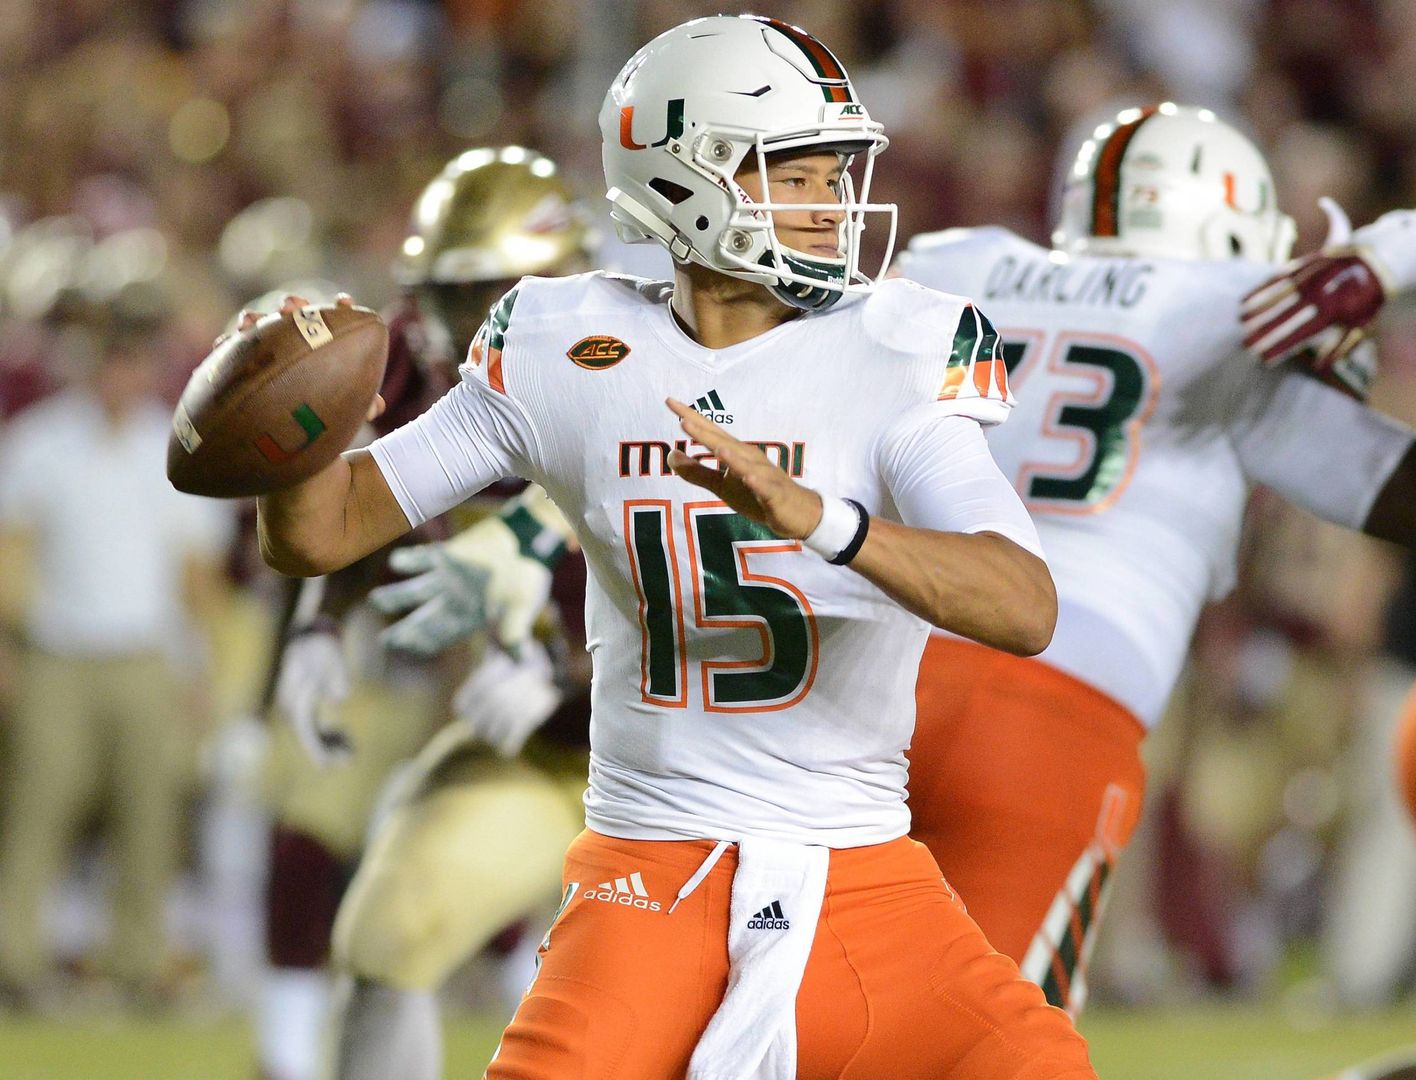 Canes Fall to No. 12 Florida State 29-24